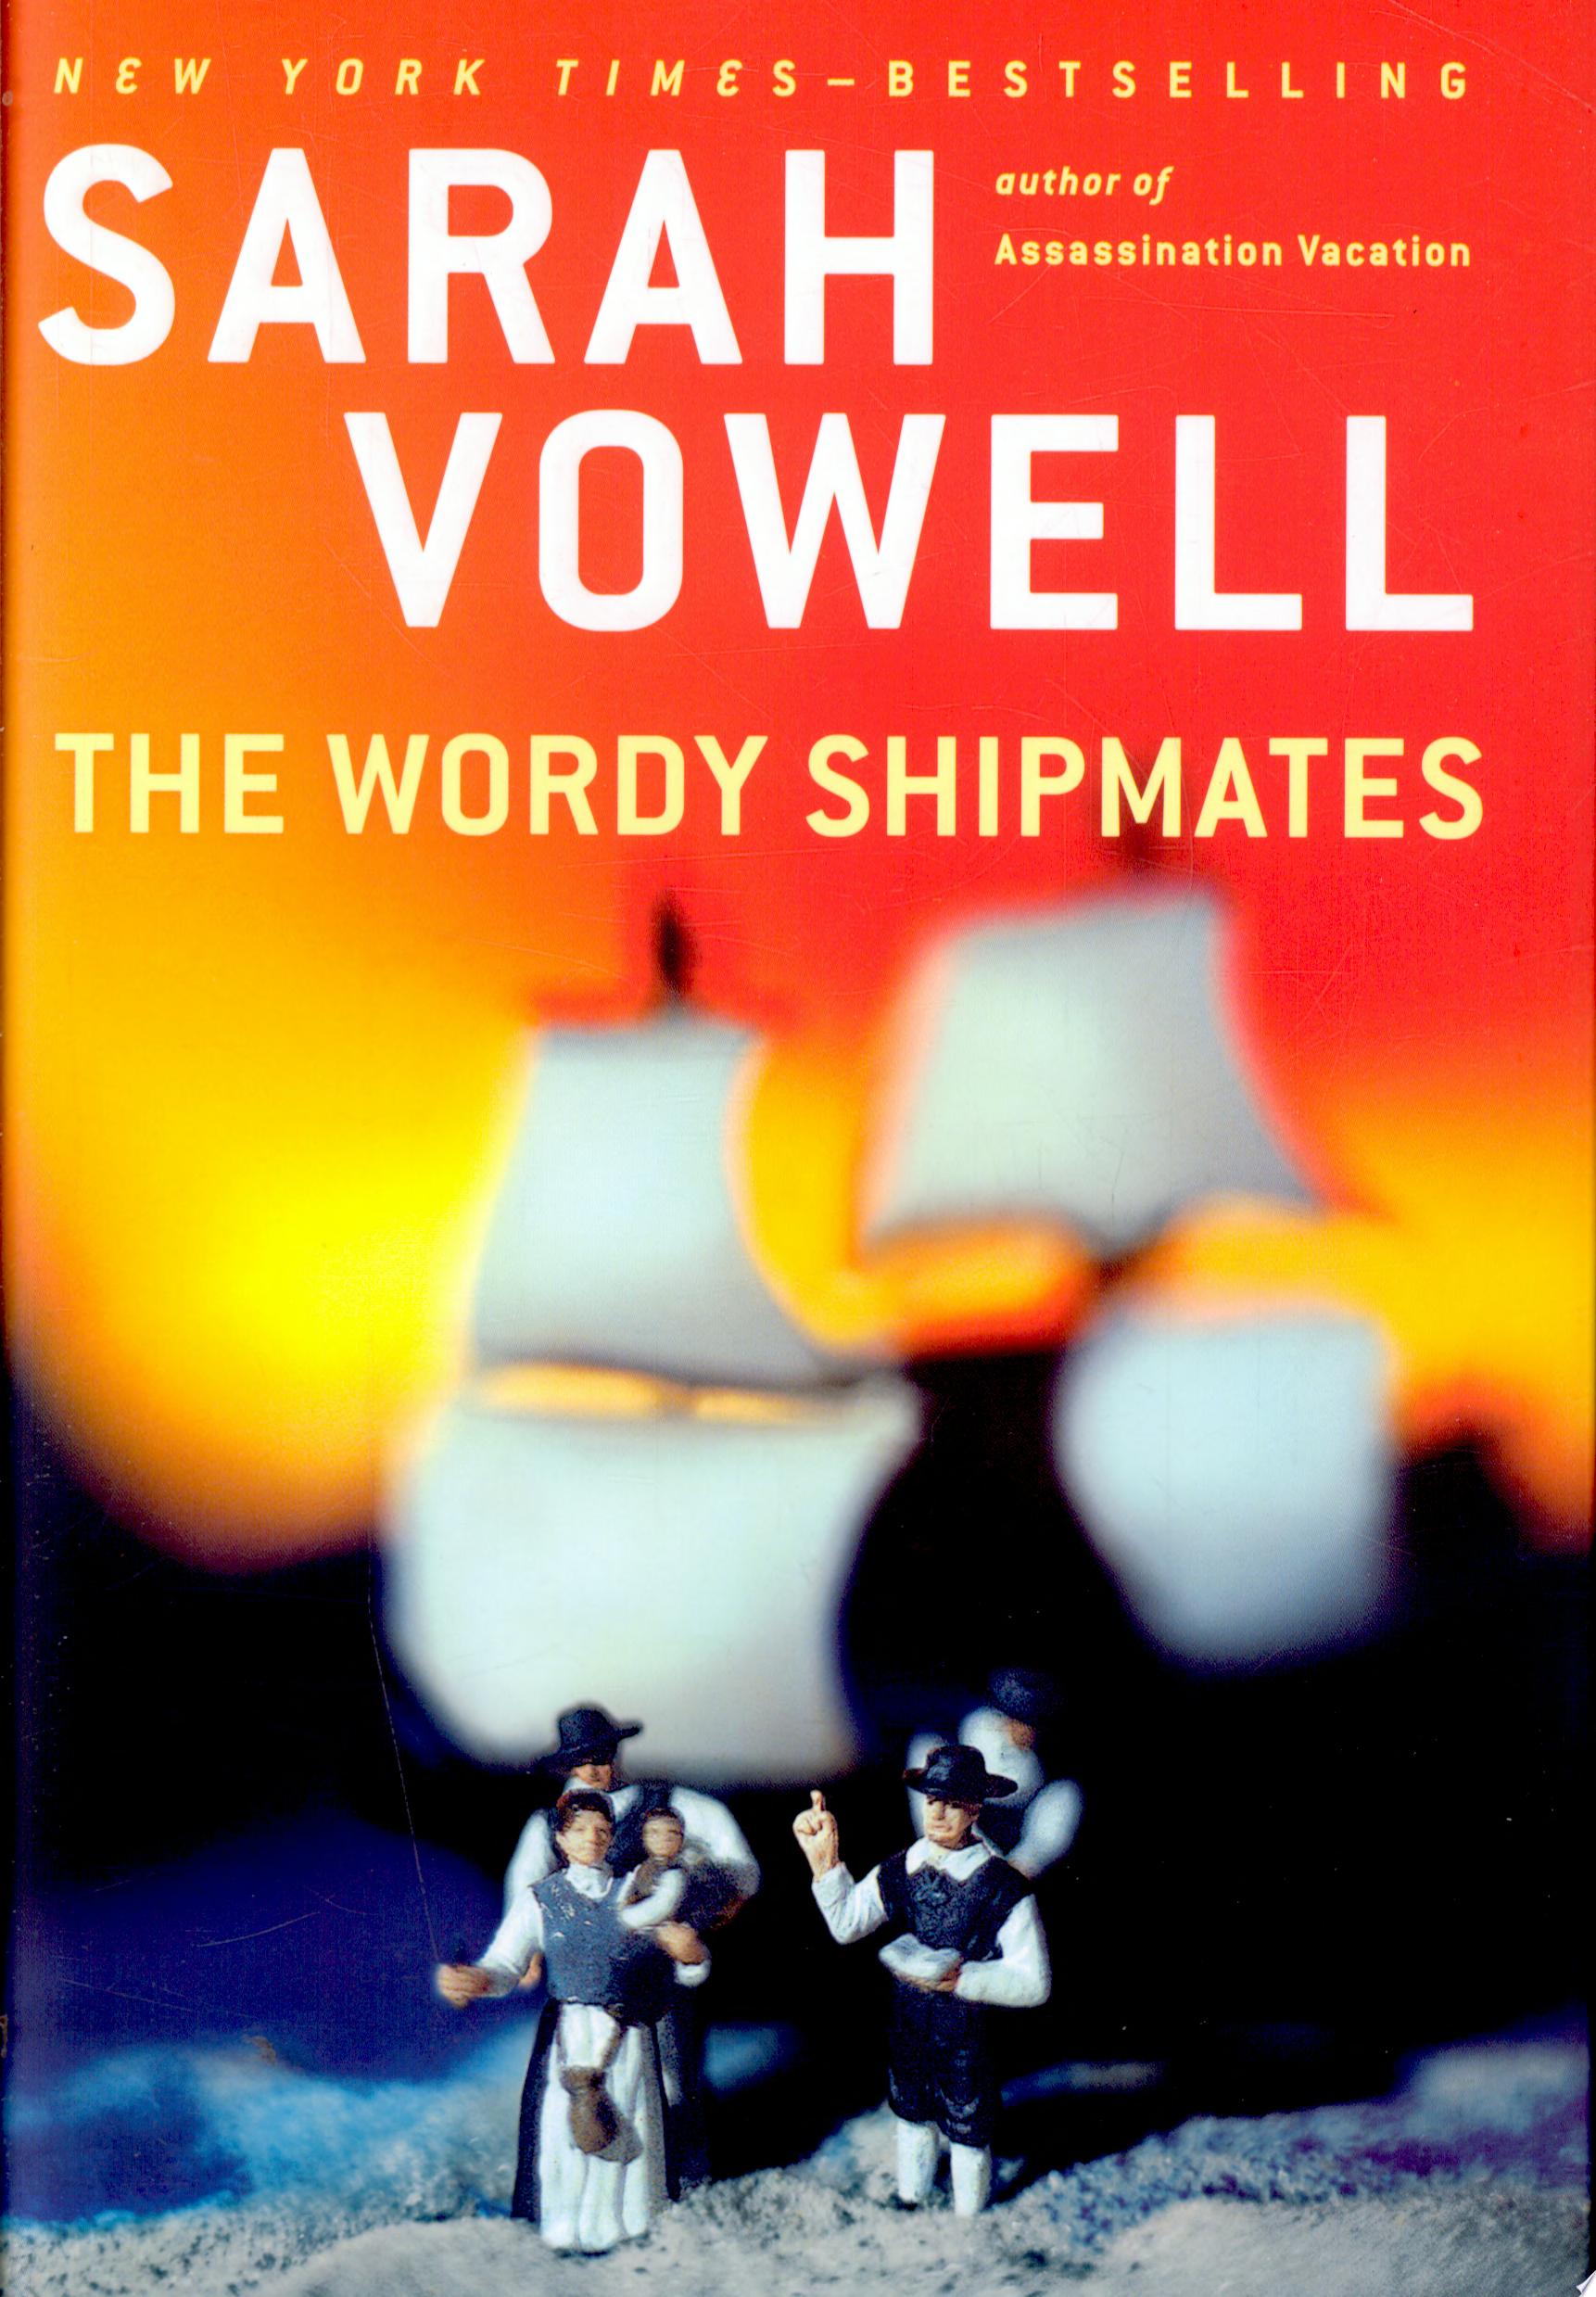 Image for "The Wordy Shipmates"